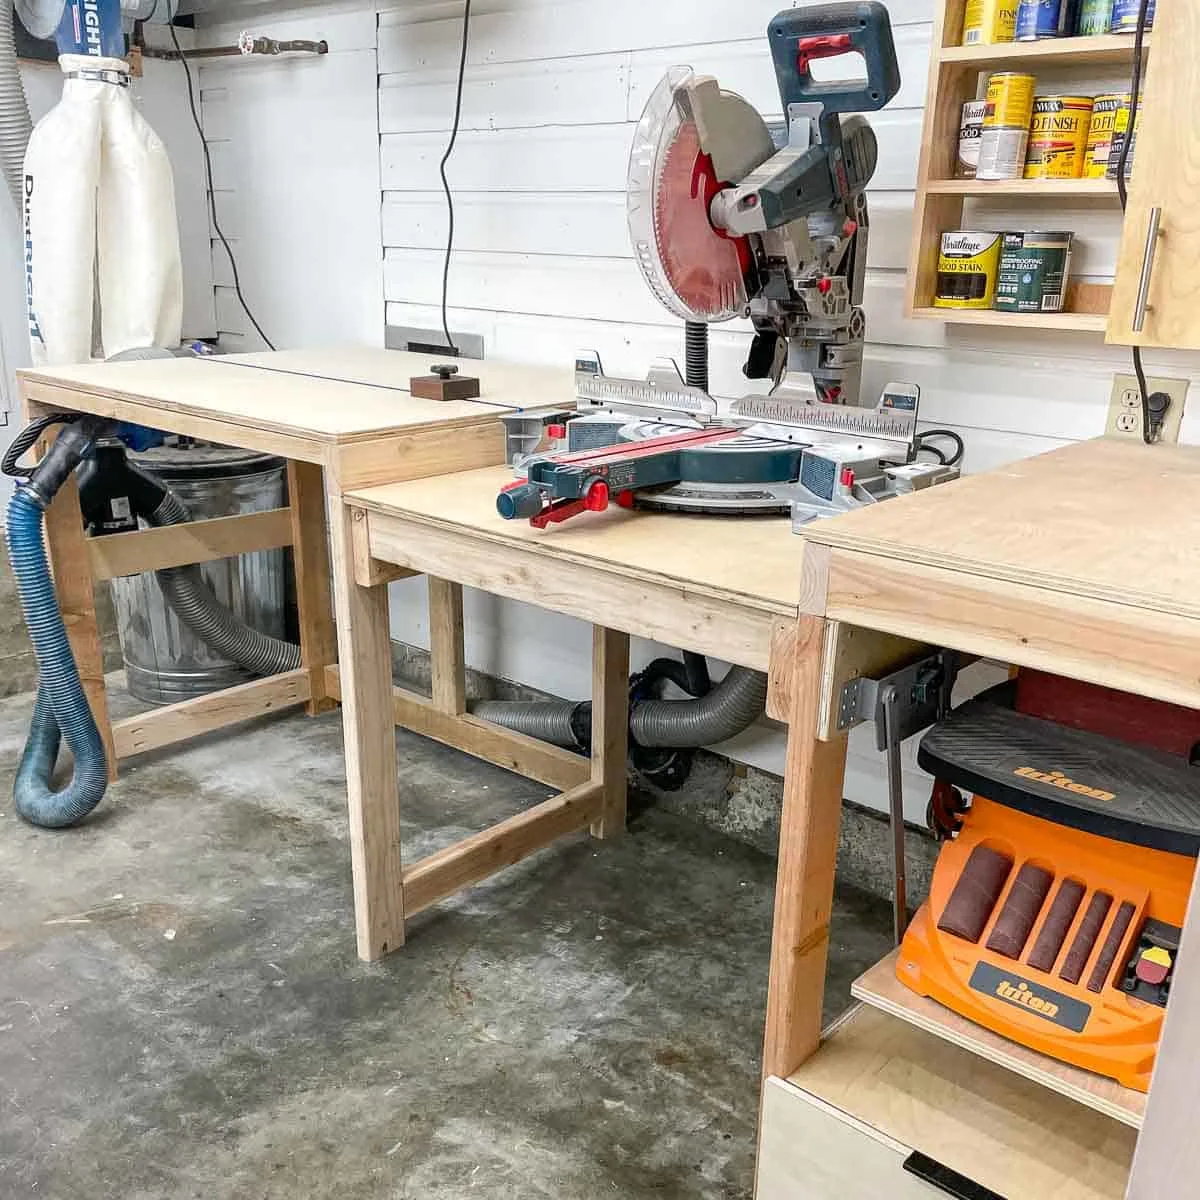 how high should a miter saw table be? 2